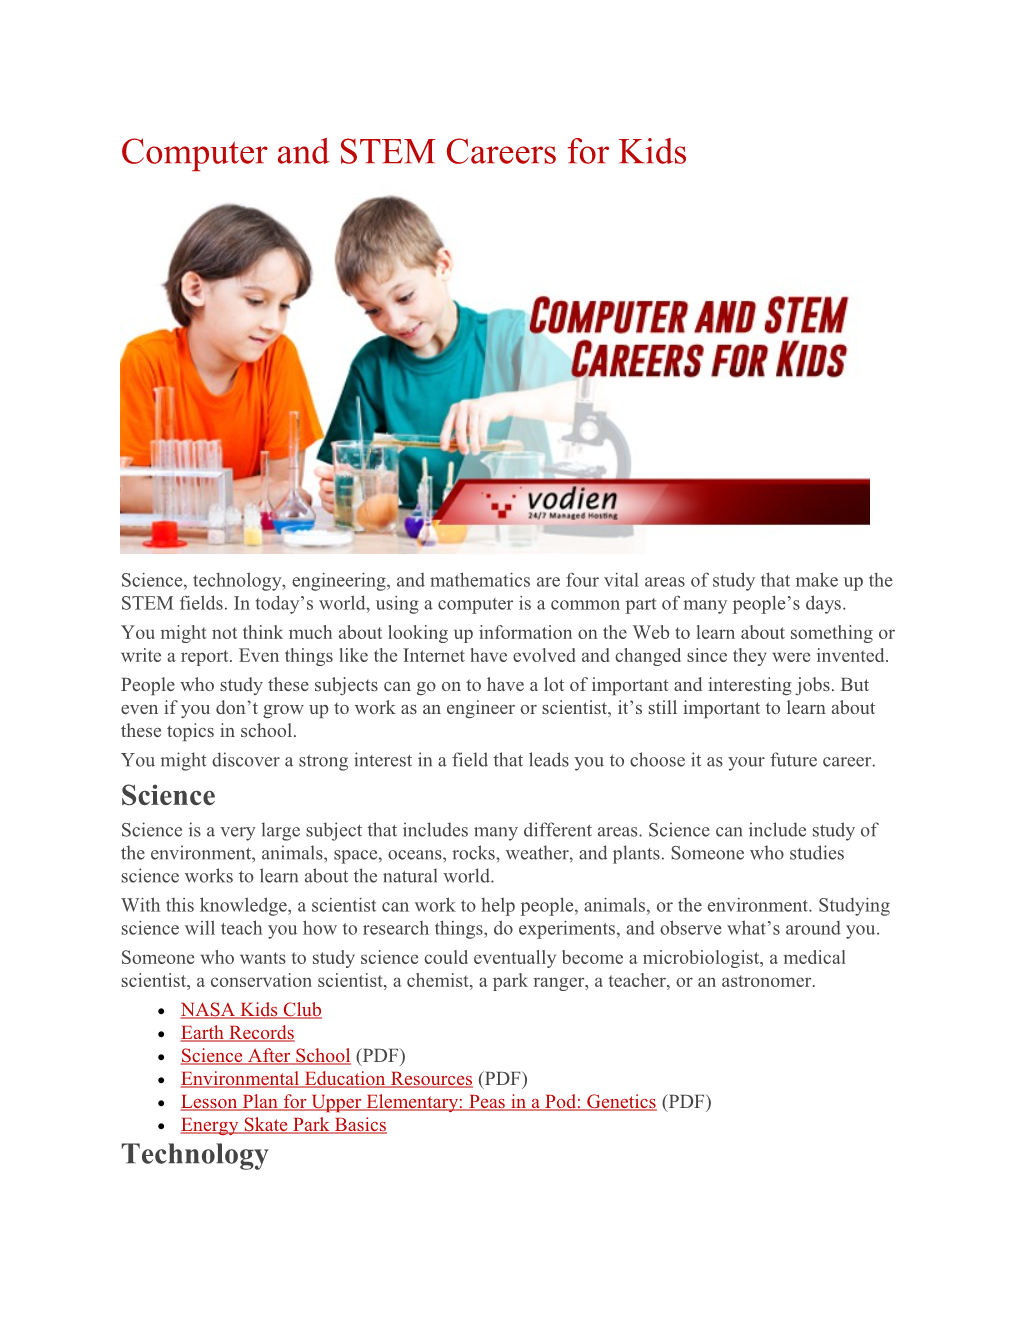 Computer and STEM Careers for Kids